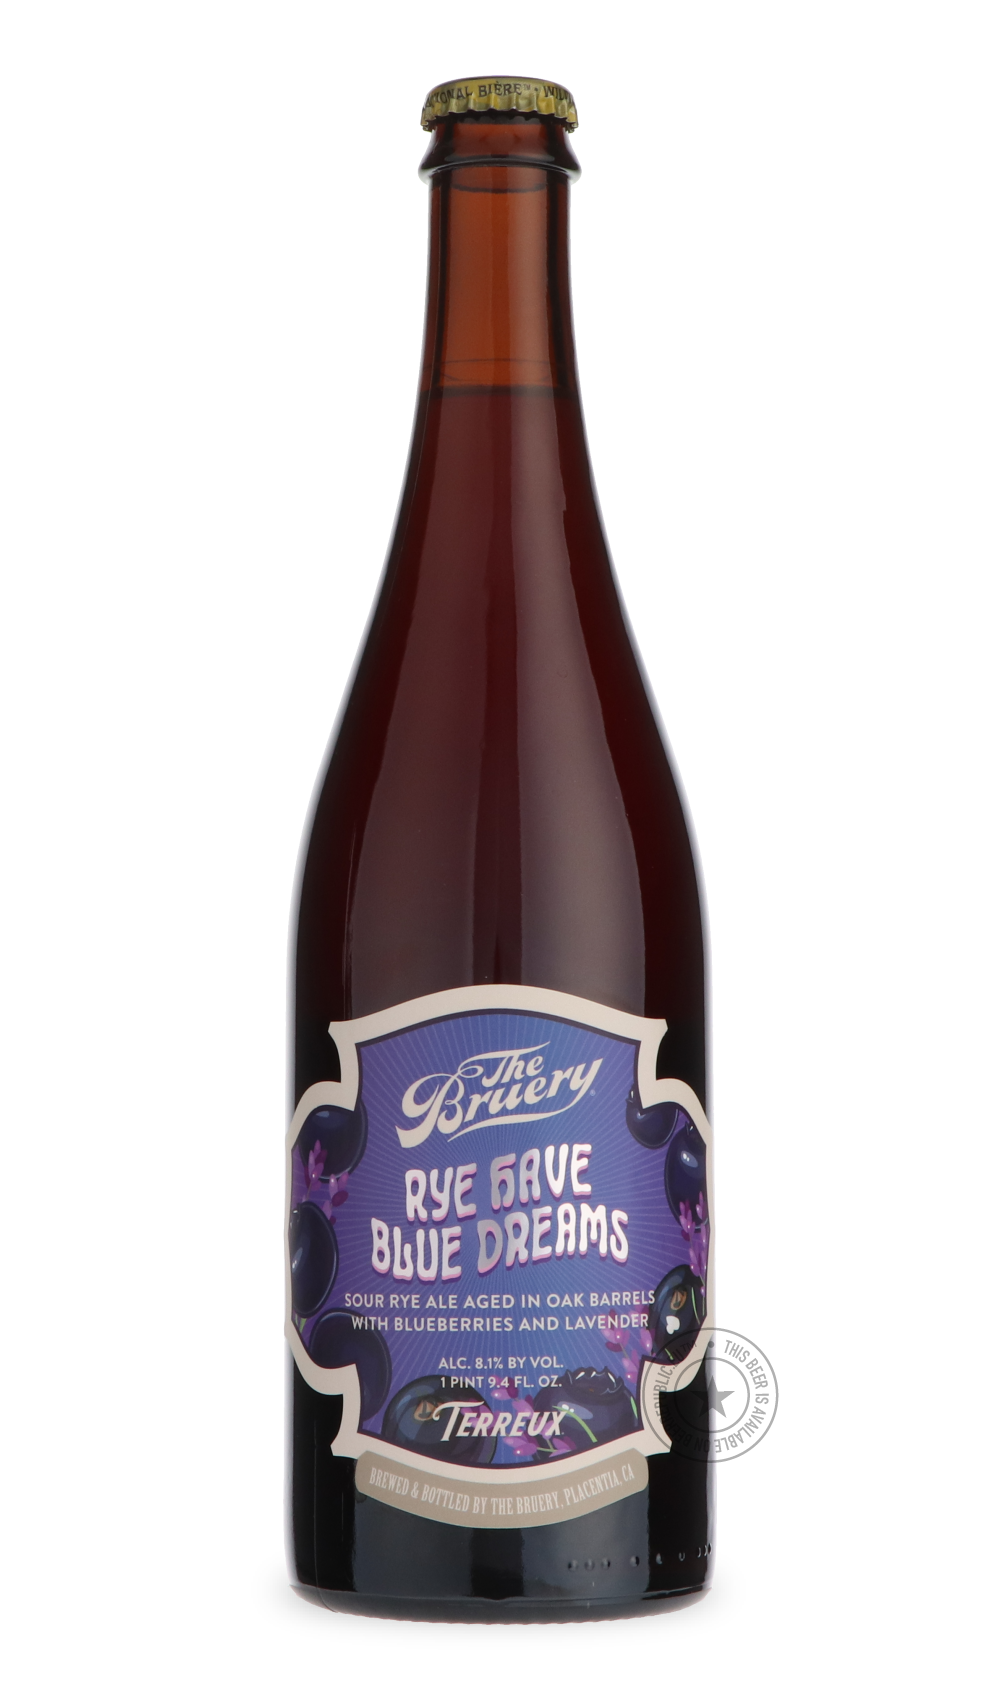 -The Bruery- Rye Have Blue Dreams-Sour / Wild & Fruity- Only @ Beer Republic - The best online beer store for American & Canadian craft beer - Buy beer online from the USA and Canada - Bier online kopen - Amerikaans bier kopen - Craft beer store - Craft beer kopen - Amerikanisch bier kaufen - Bier online kaufen - Acheter biere online - IPA - Stout - Porter - New England IPA - Hazy IPA - Imperial Stout - Barrel Aged - Barrel Aged Imperial Stout - Brown - Dark beer - Blond - Blonde - Pilsner - Lager - Wheat -